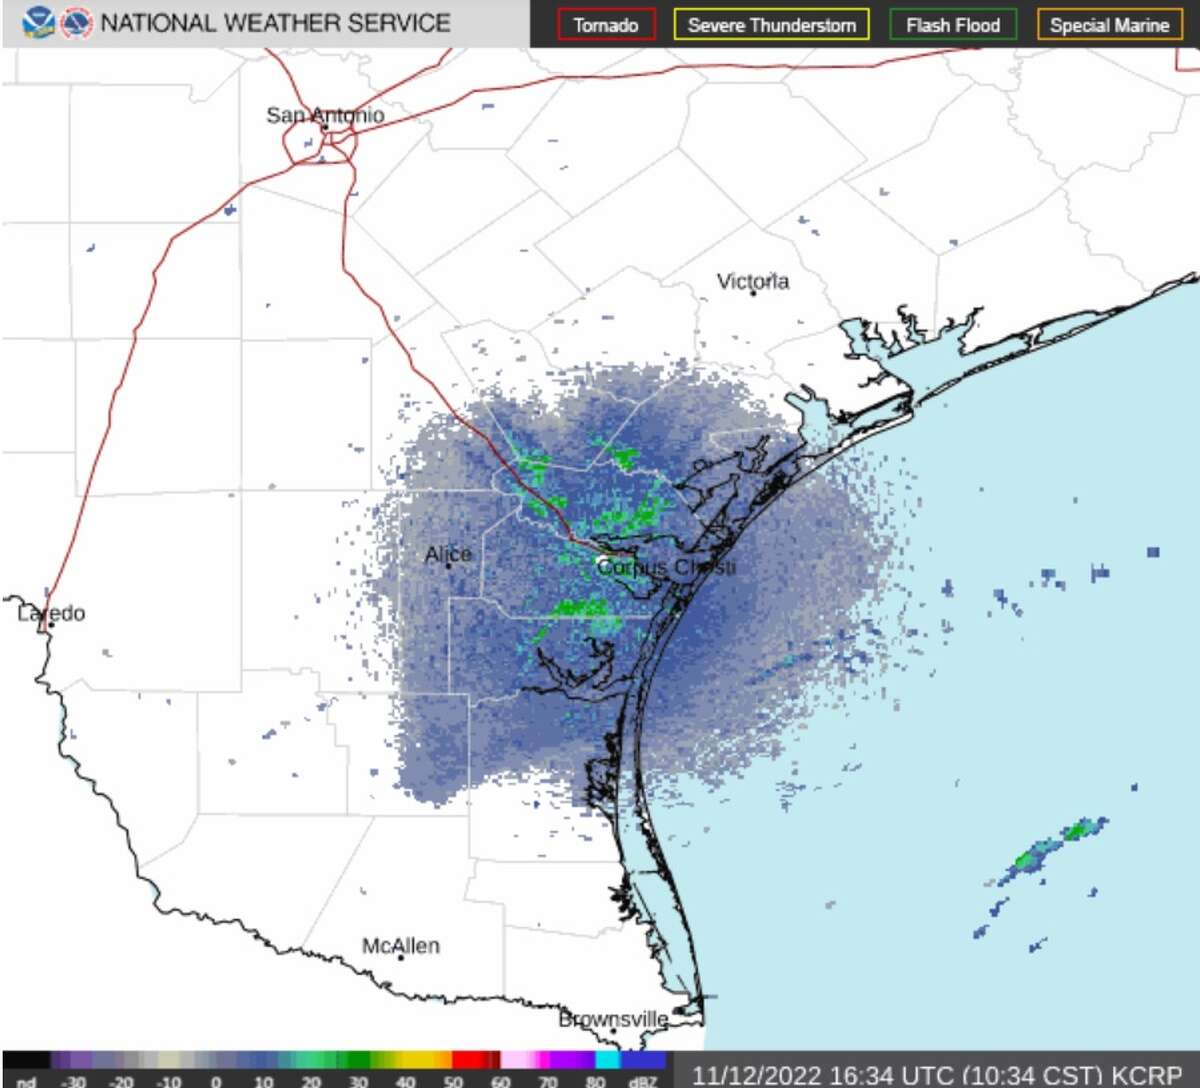 A cold front is shown in Texas on Saturday, Nov. 12.